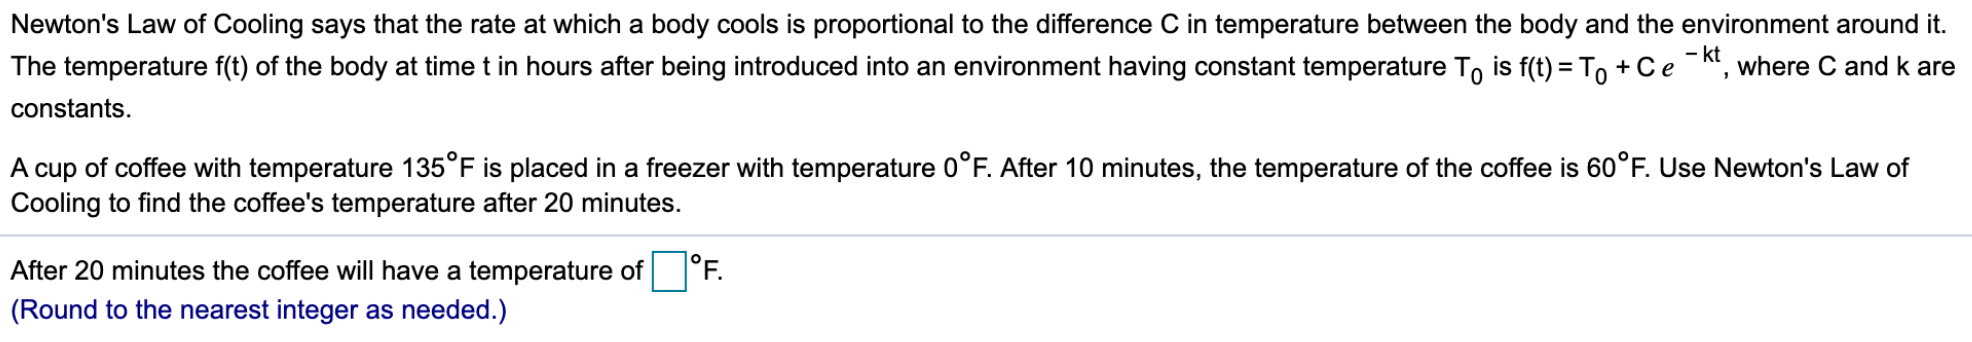 Newton's Law of Cooling says that the rate at which a body cools is proportional to the difference C in temperature between the body and the environment around it.
The temperature f(t) of the body at time t in hours after being introduced into an environment having constant temperature To is f(t) = To +Ce-kt, where C and k are
constants.
A cup of coffee with temperature 135°F is placed in a freezer with temperature 0°F. After 10 minutes, the temperature of the coffee is 60°F. Use Newton's Law of
Cooling to find the coffee's temperature after 20 minutes.
|°F.
After 20 minutes the coffee will have a temperature of
(Round to the nearest integer as needed.)
